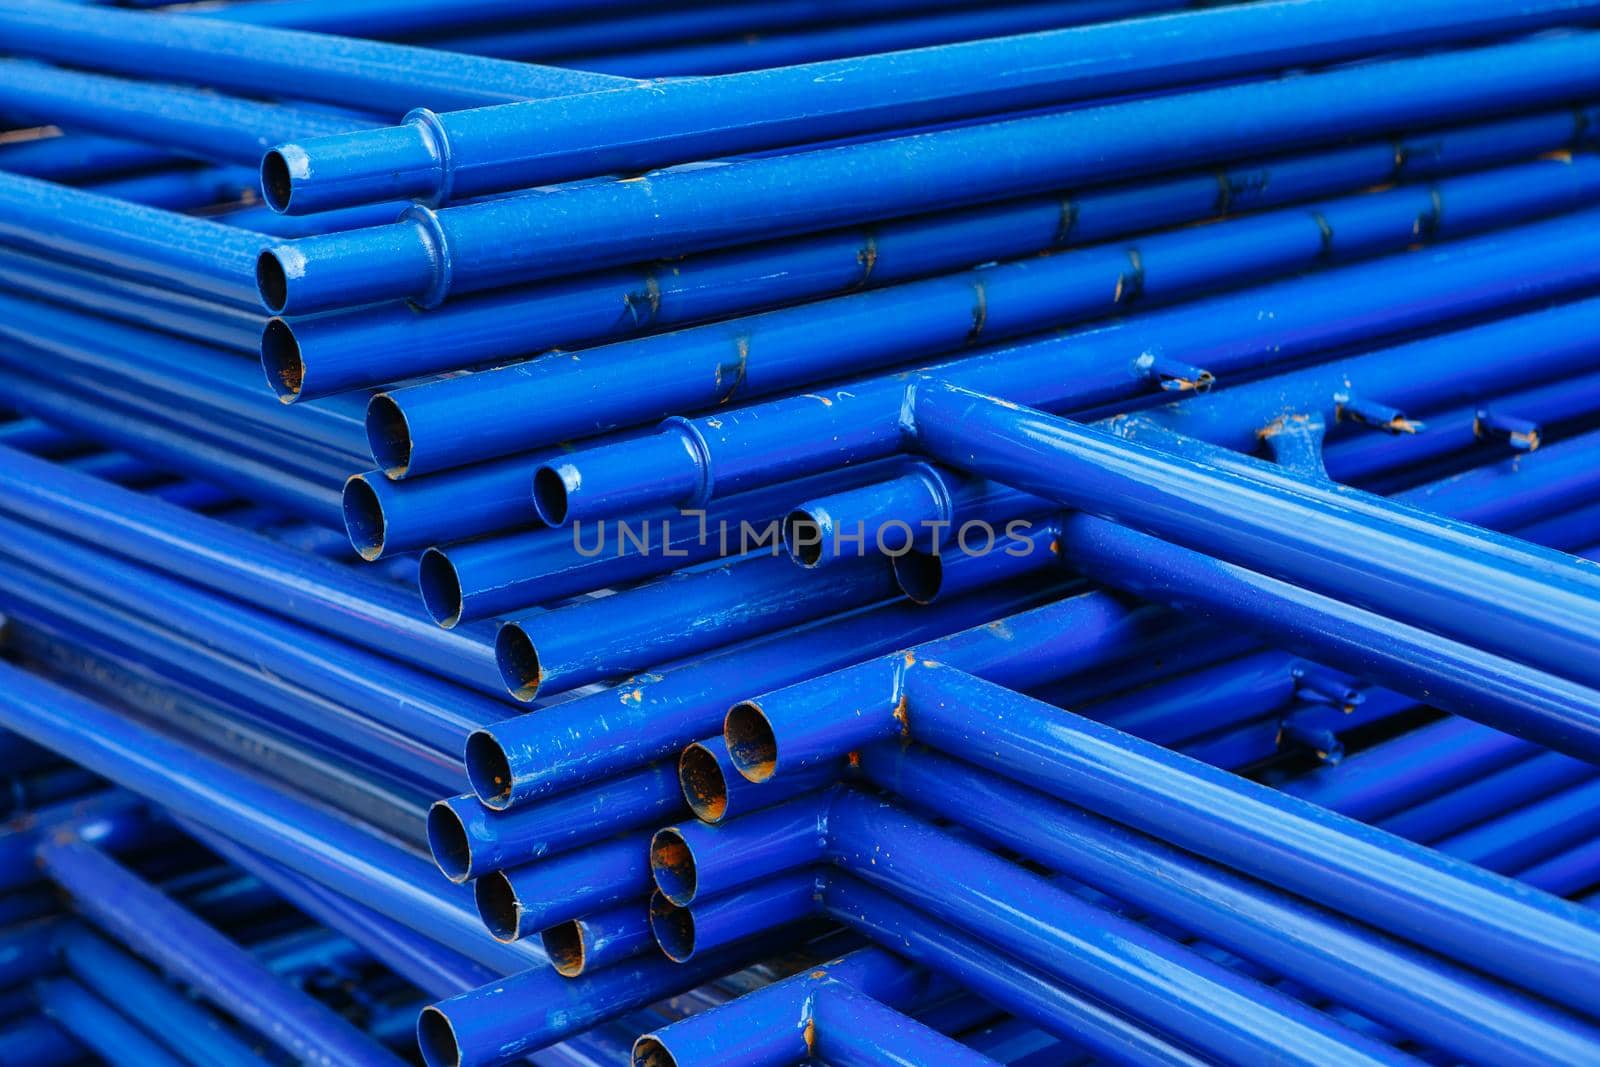 Blue pipes lying on top of each other. Scaffolding for building repairs by deandy